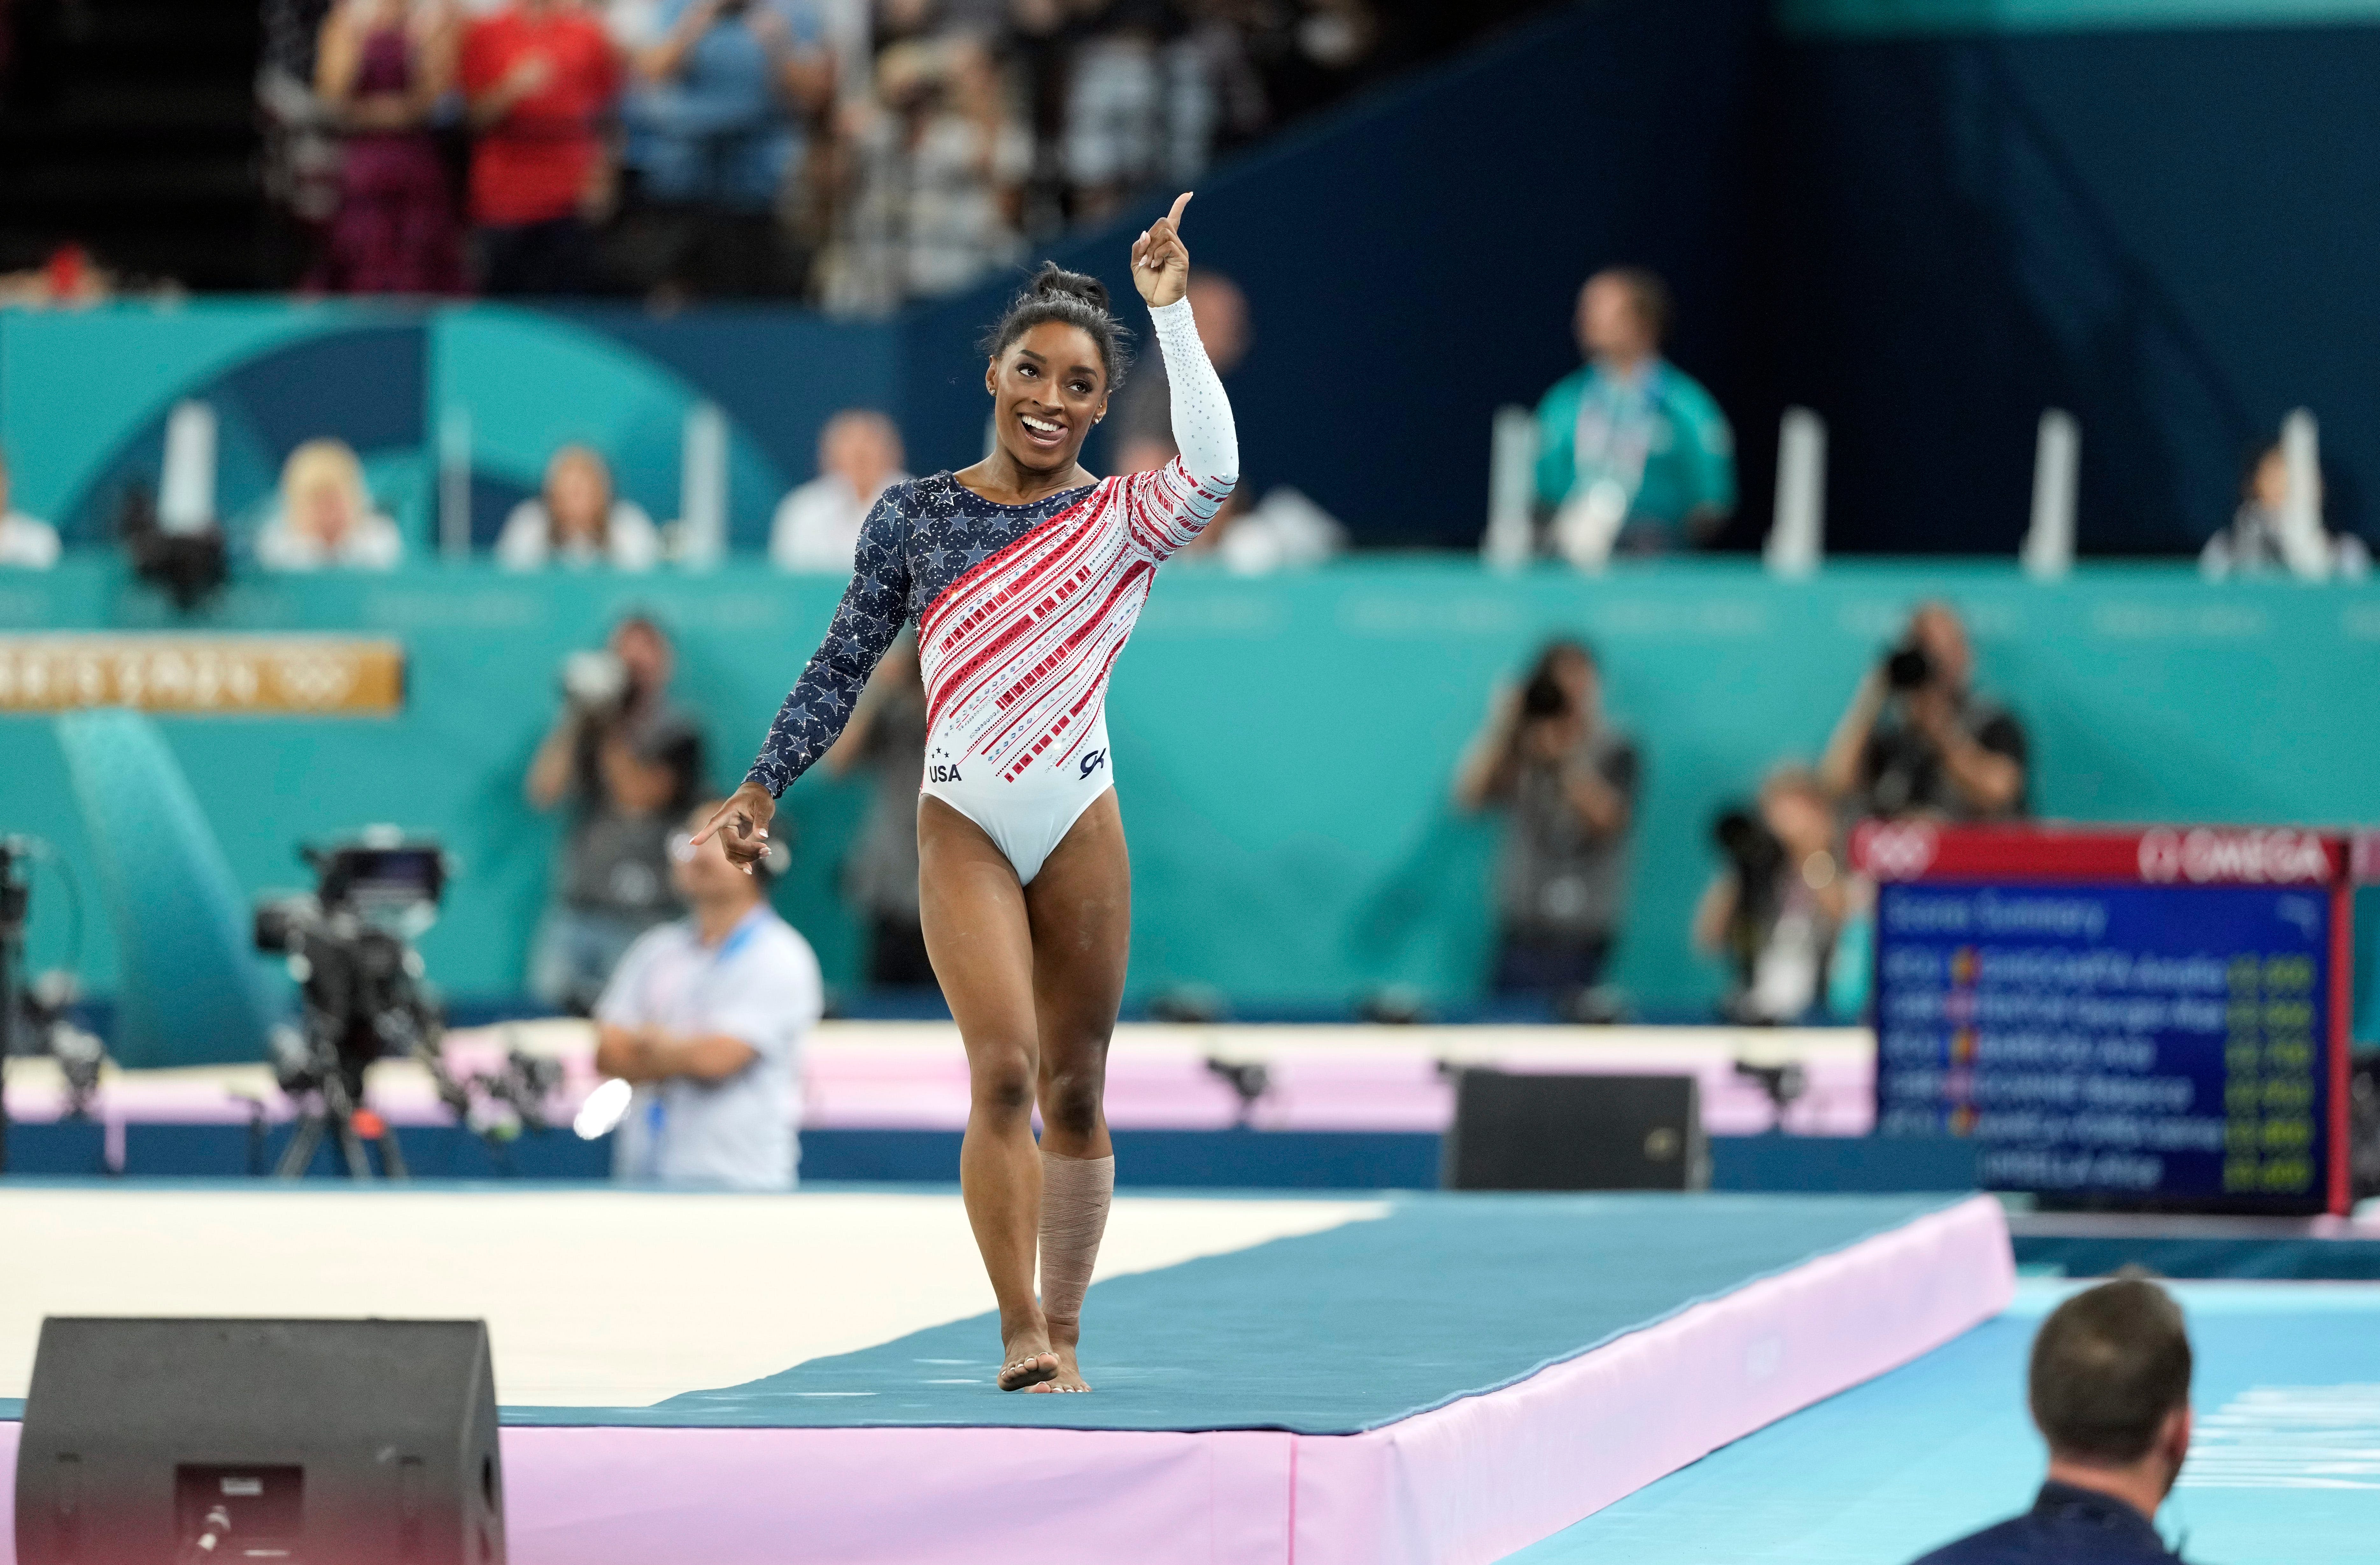 Olympic gymnastics live updates: Simone Biles, USA win gold medal in team final